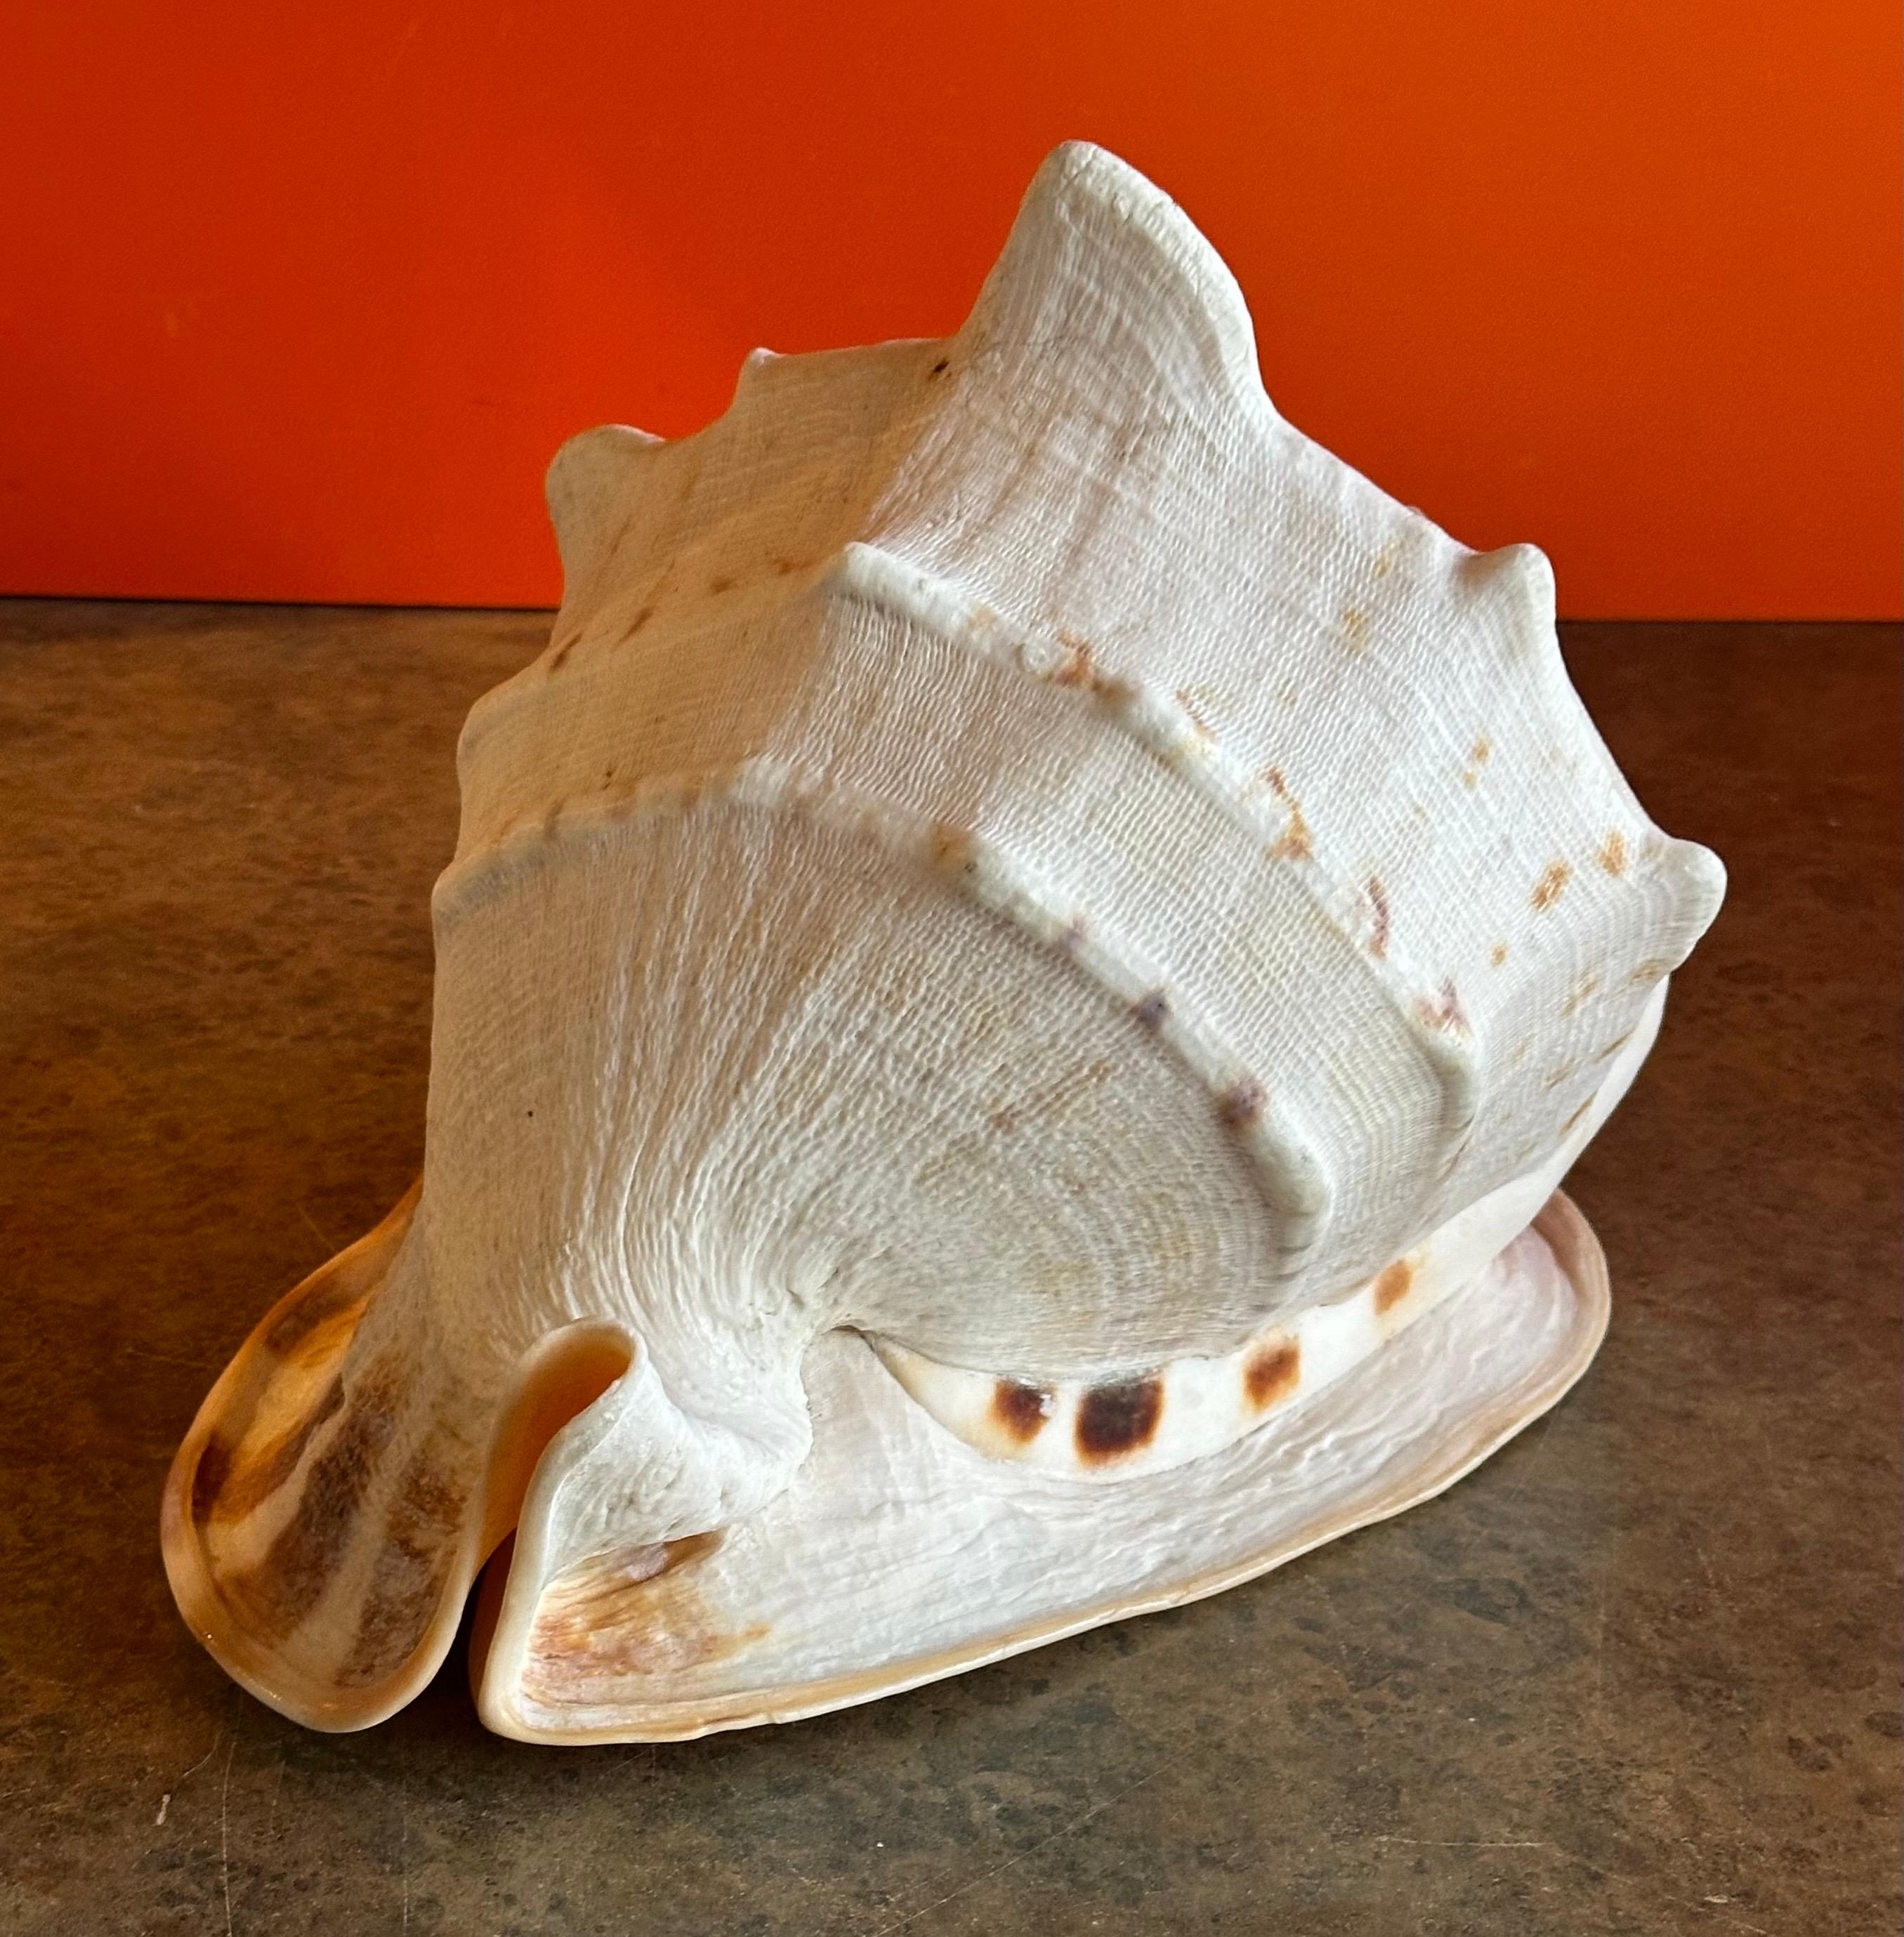 how much is a large conch shell worth